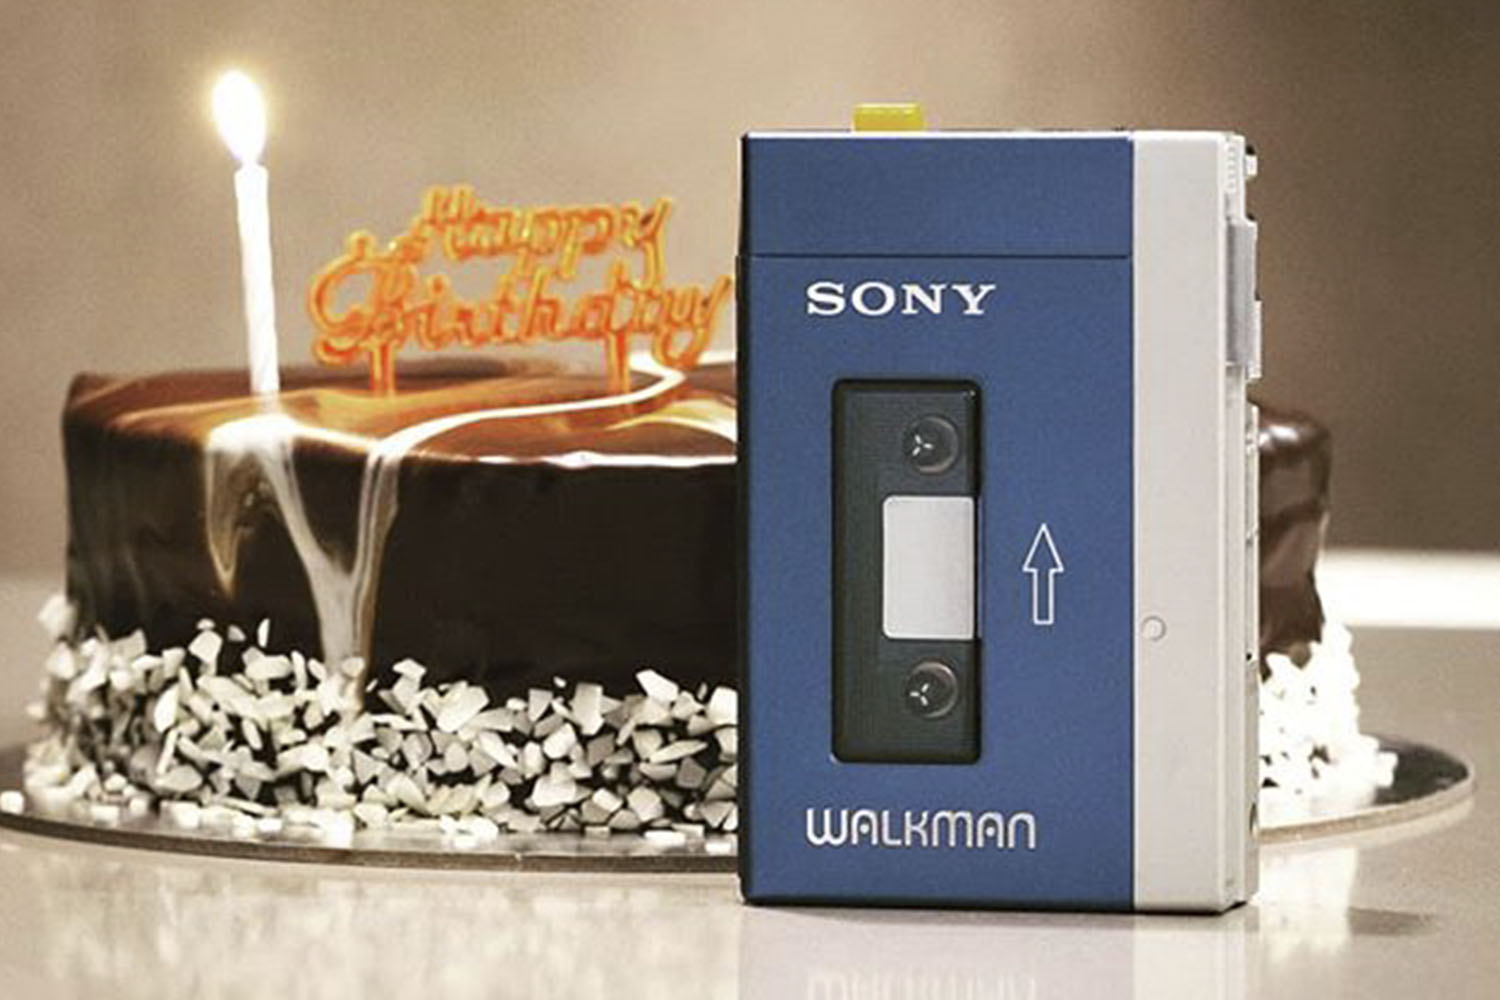 The Sony Walkman is back from 1979 and you can buy it now | Better Homes and Gardens